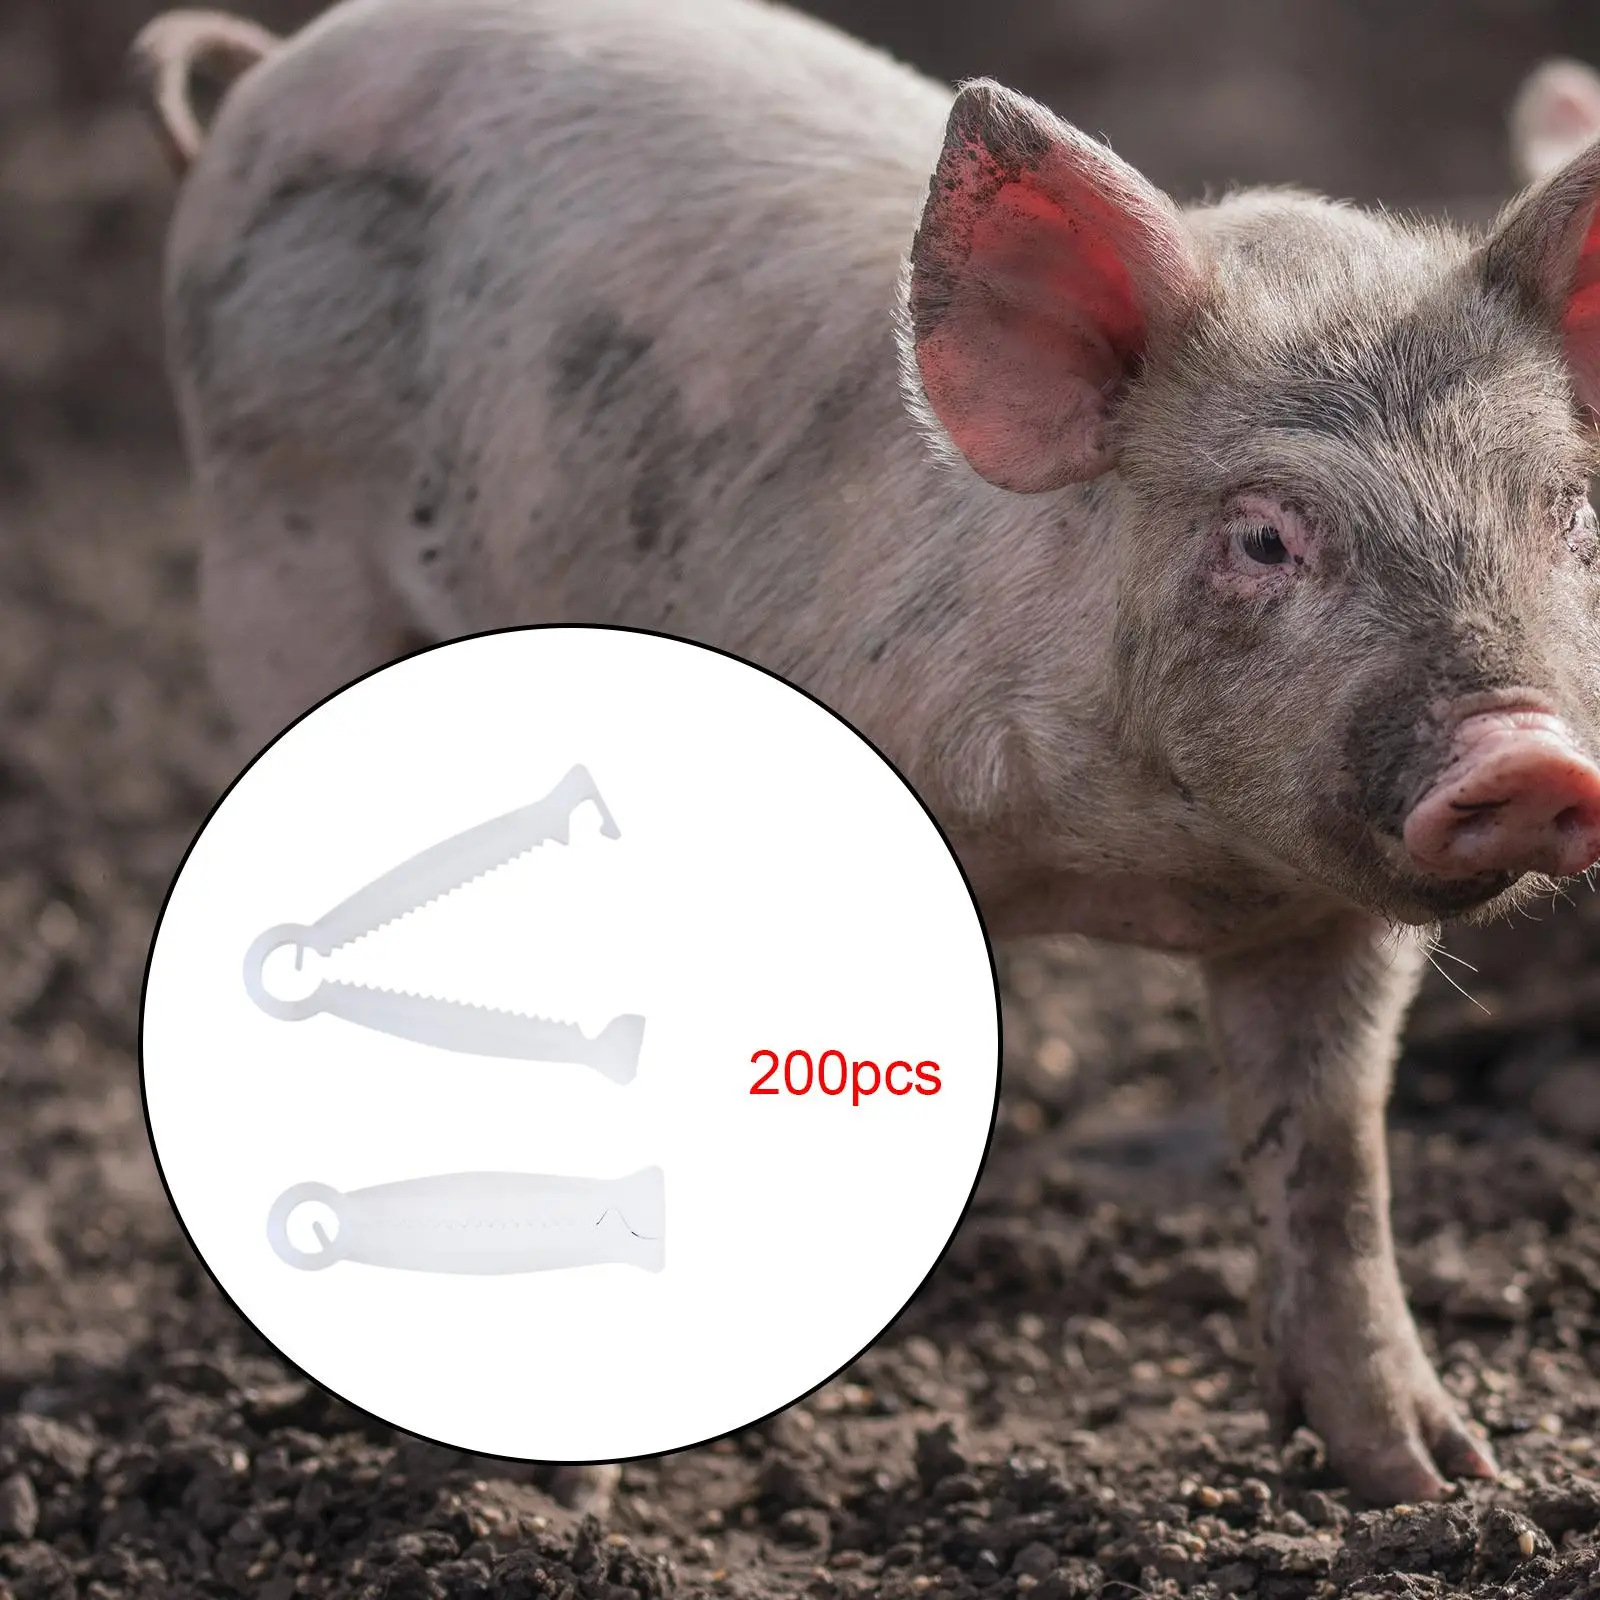 200Pcs Pig Umbilical Cord Clip Multipurpose Practical Portable Navel Cord Clamp for Pet for Sheep Pigs Farming Pet Animals sheep